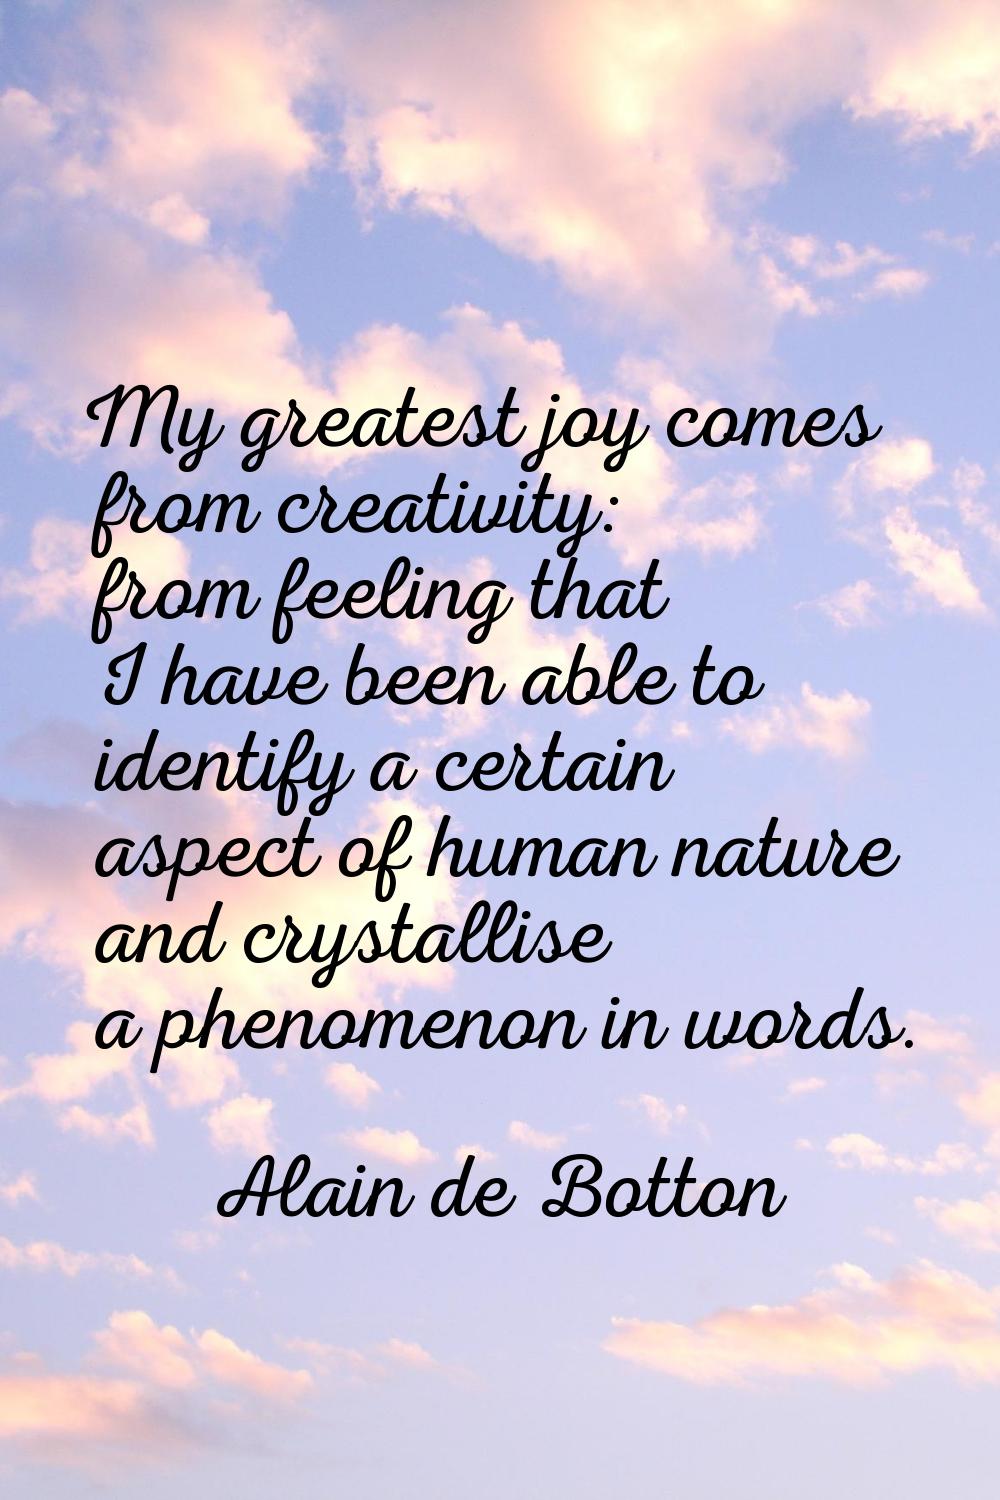 My greatest joy comes from creativity: from feeling that I have been able to identify a certain asp